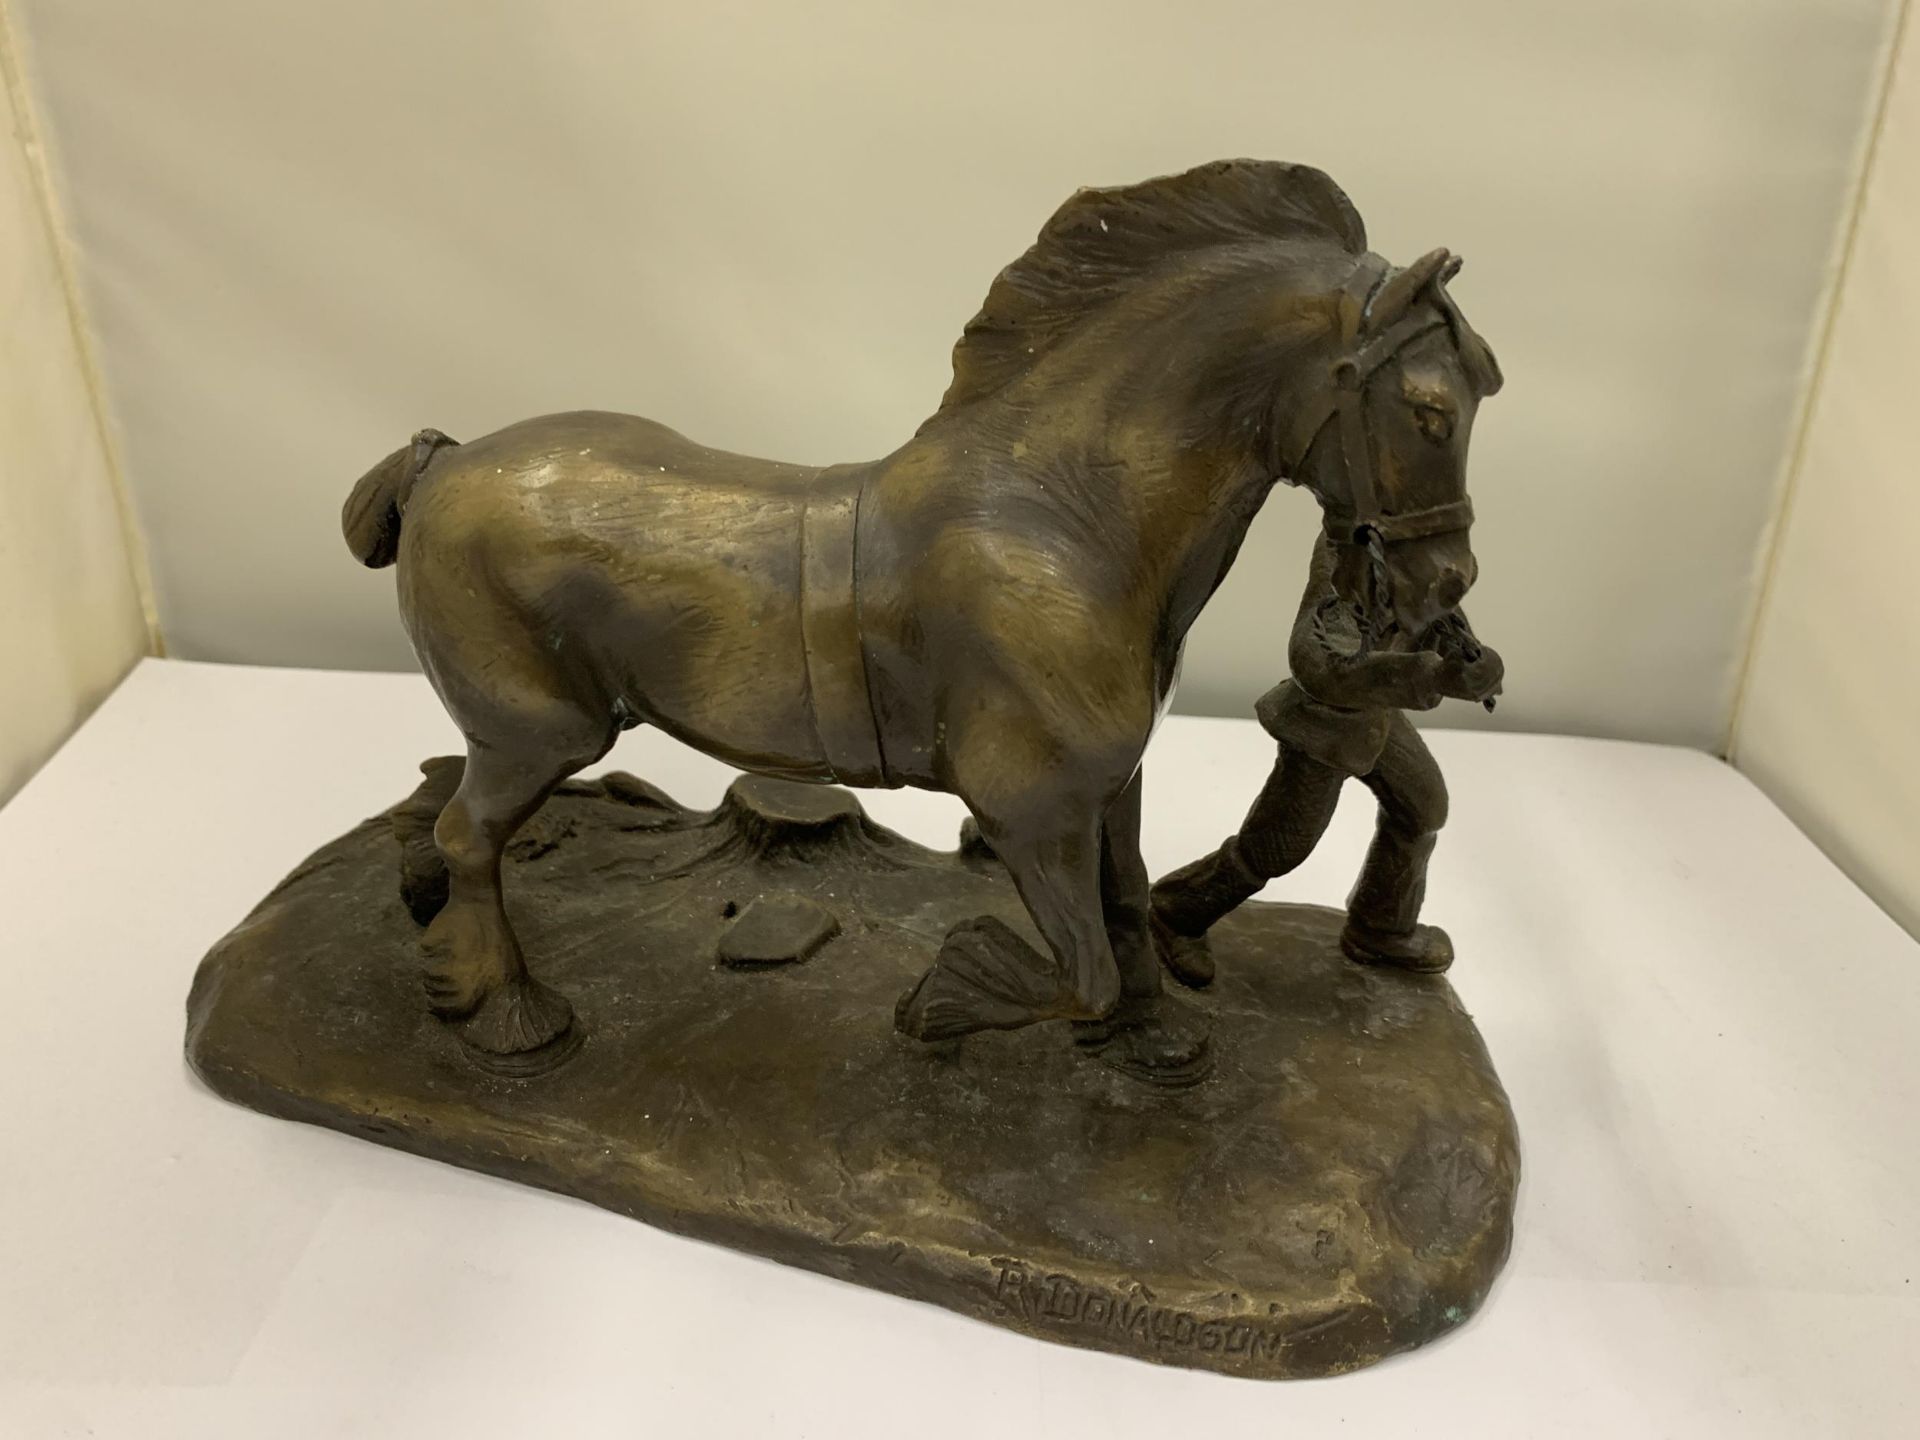 A BRONZE FIGURE OF A MAN WITH A HEAVY HORSE SIGNED R DONALDSON